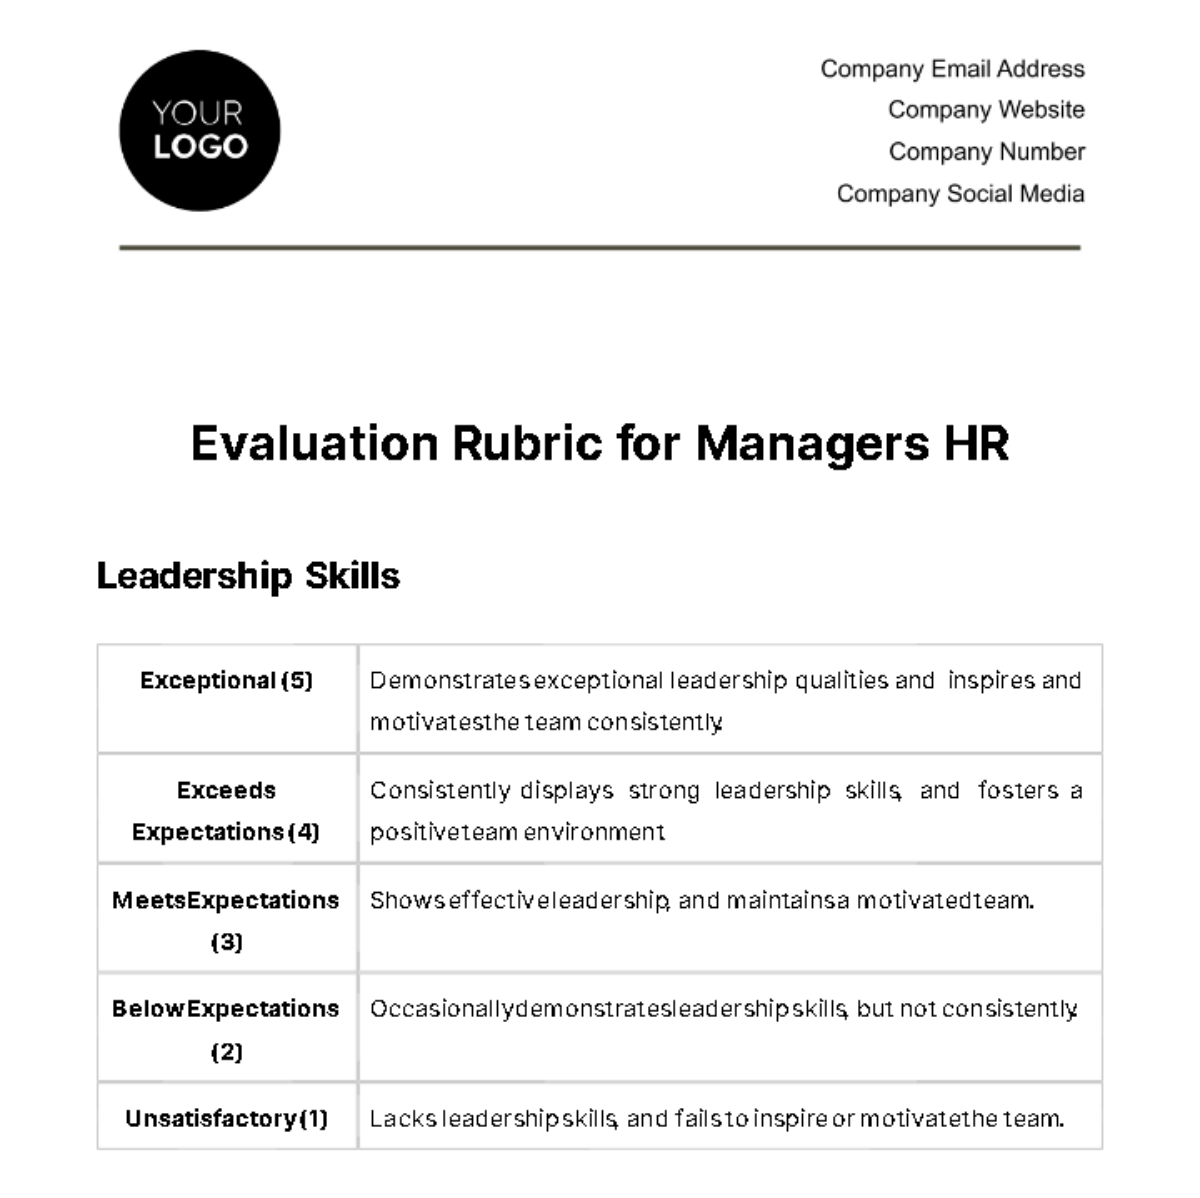 Free Evaluation Rubric for Managers HR Template